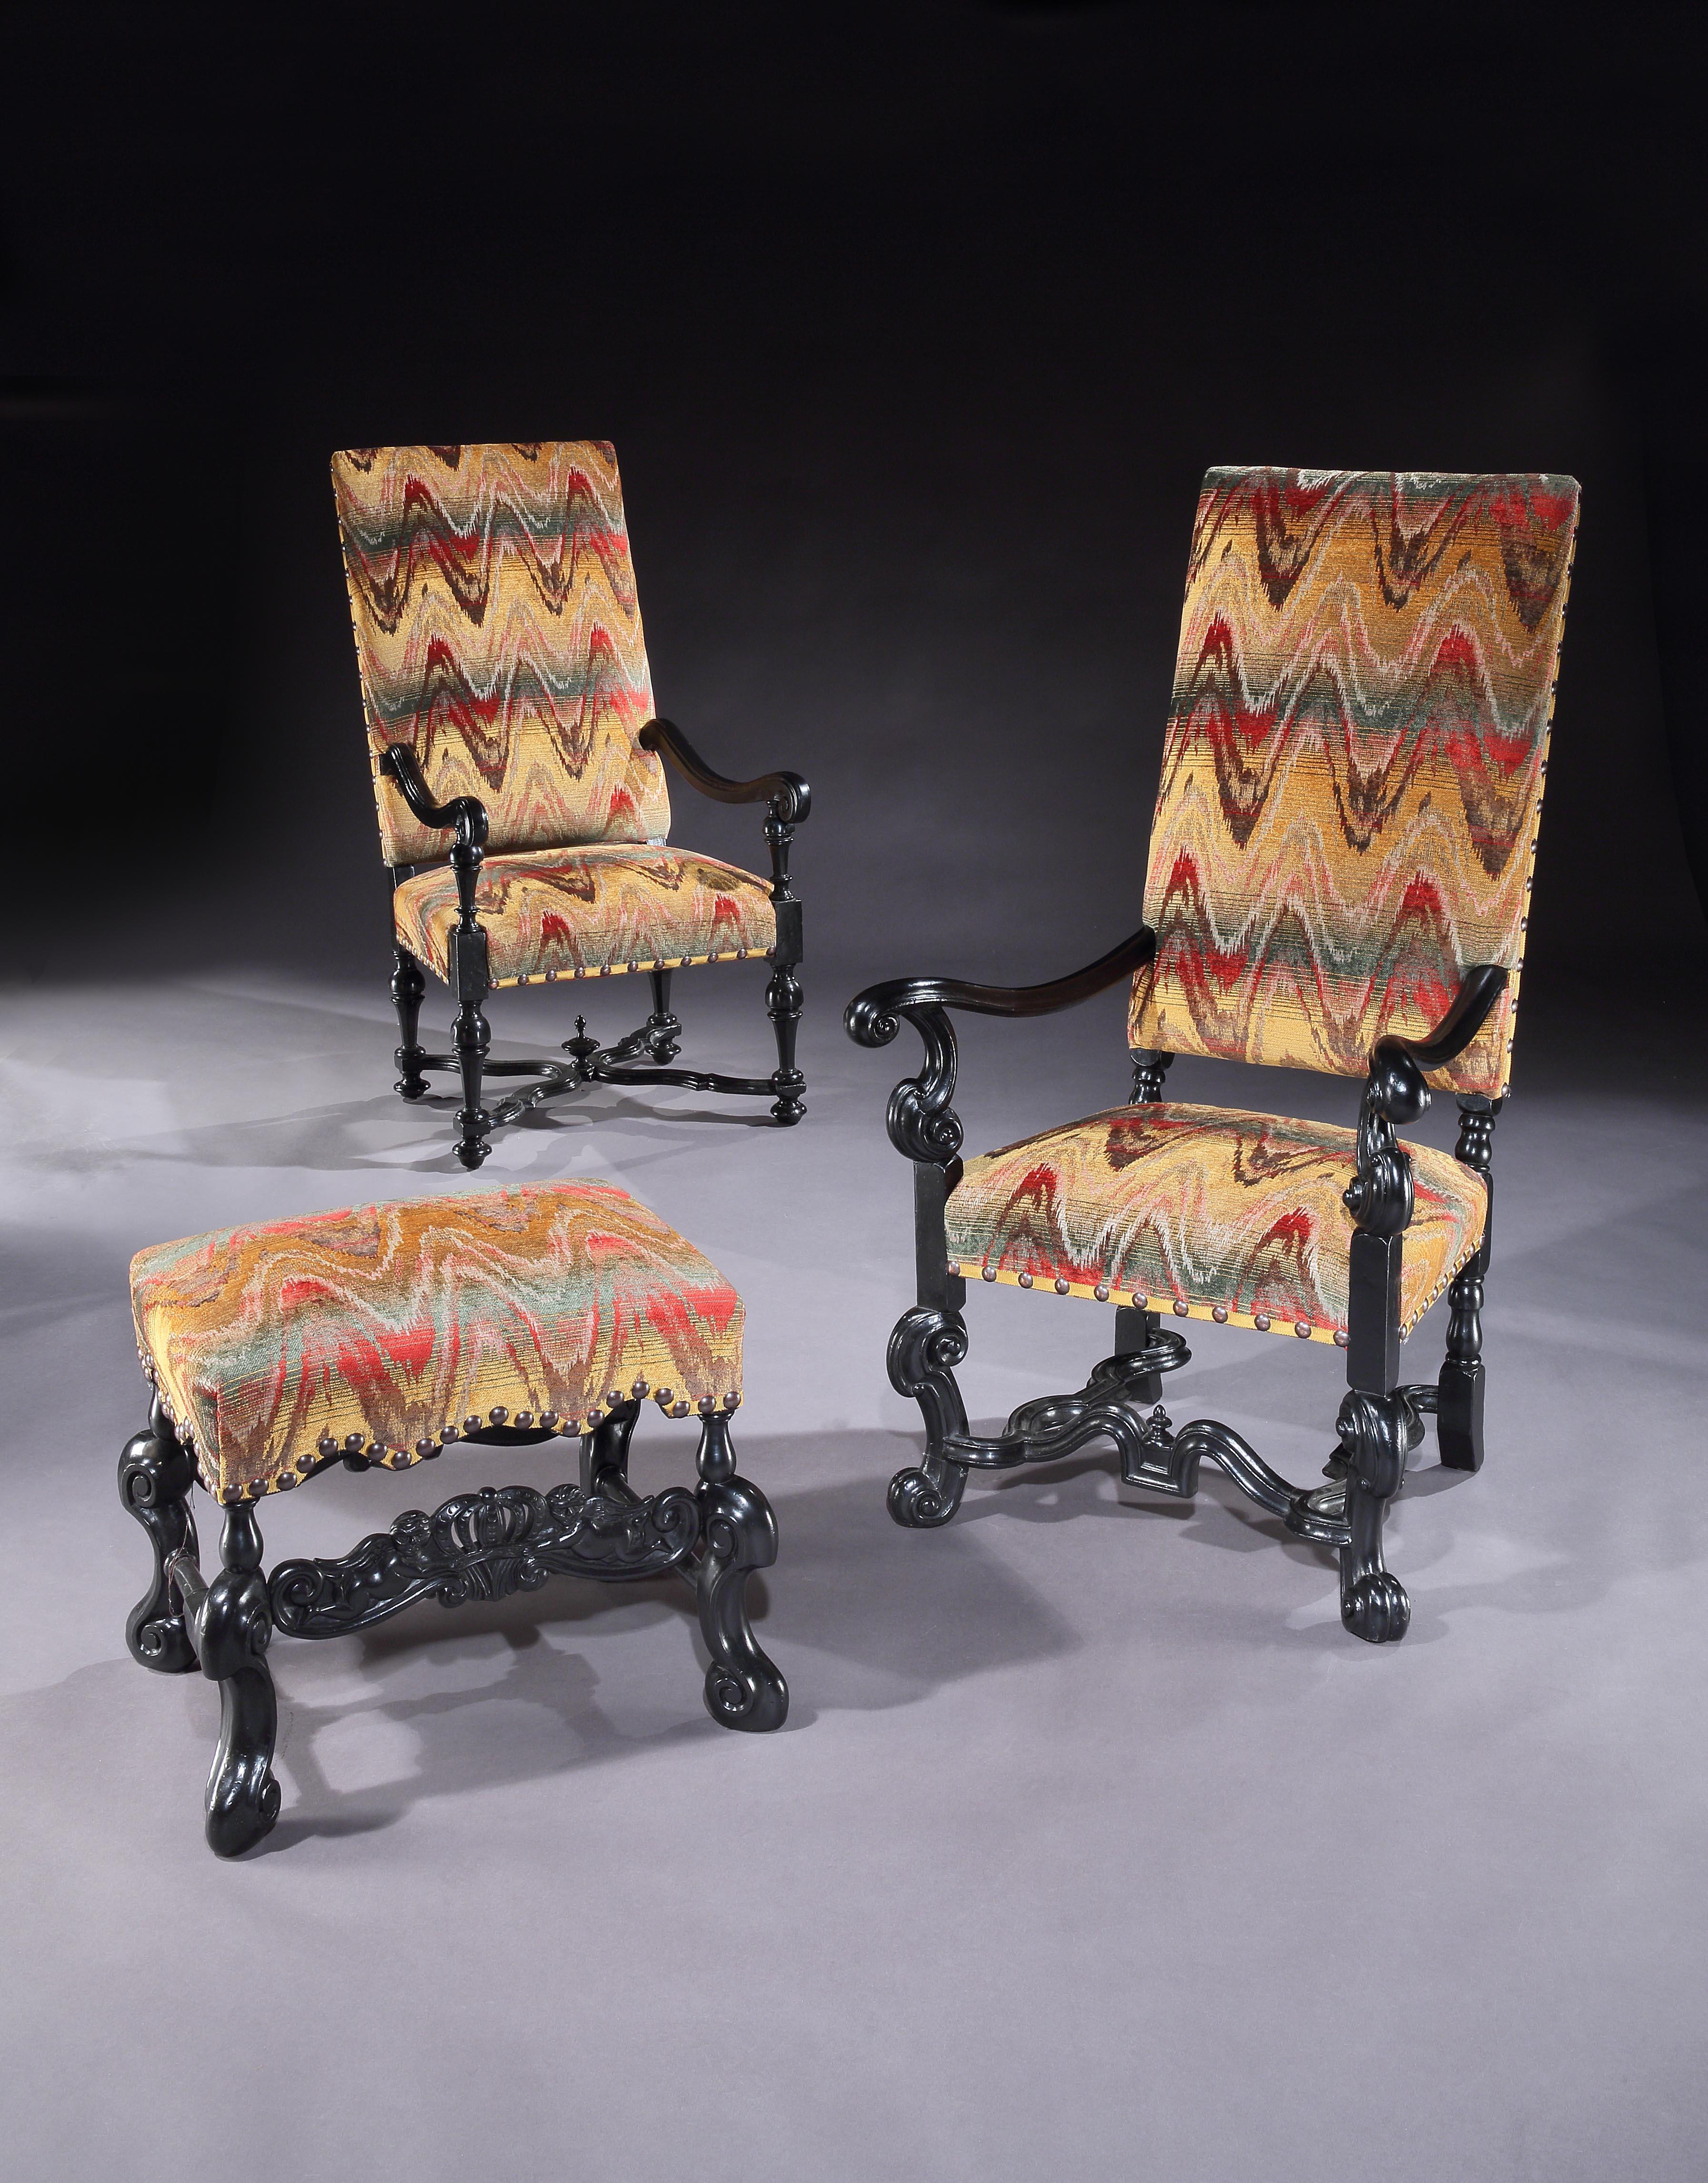 A rare, matched pair of ebonised armchairs from The Baroque & Baroque-Revival Periods & An Antiquarian, Baroque stool 

- From a private, furniture collection, acquired to represent three different periods of European manufacture & collecting of